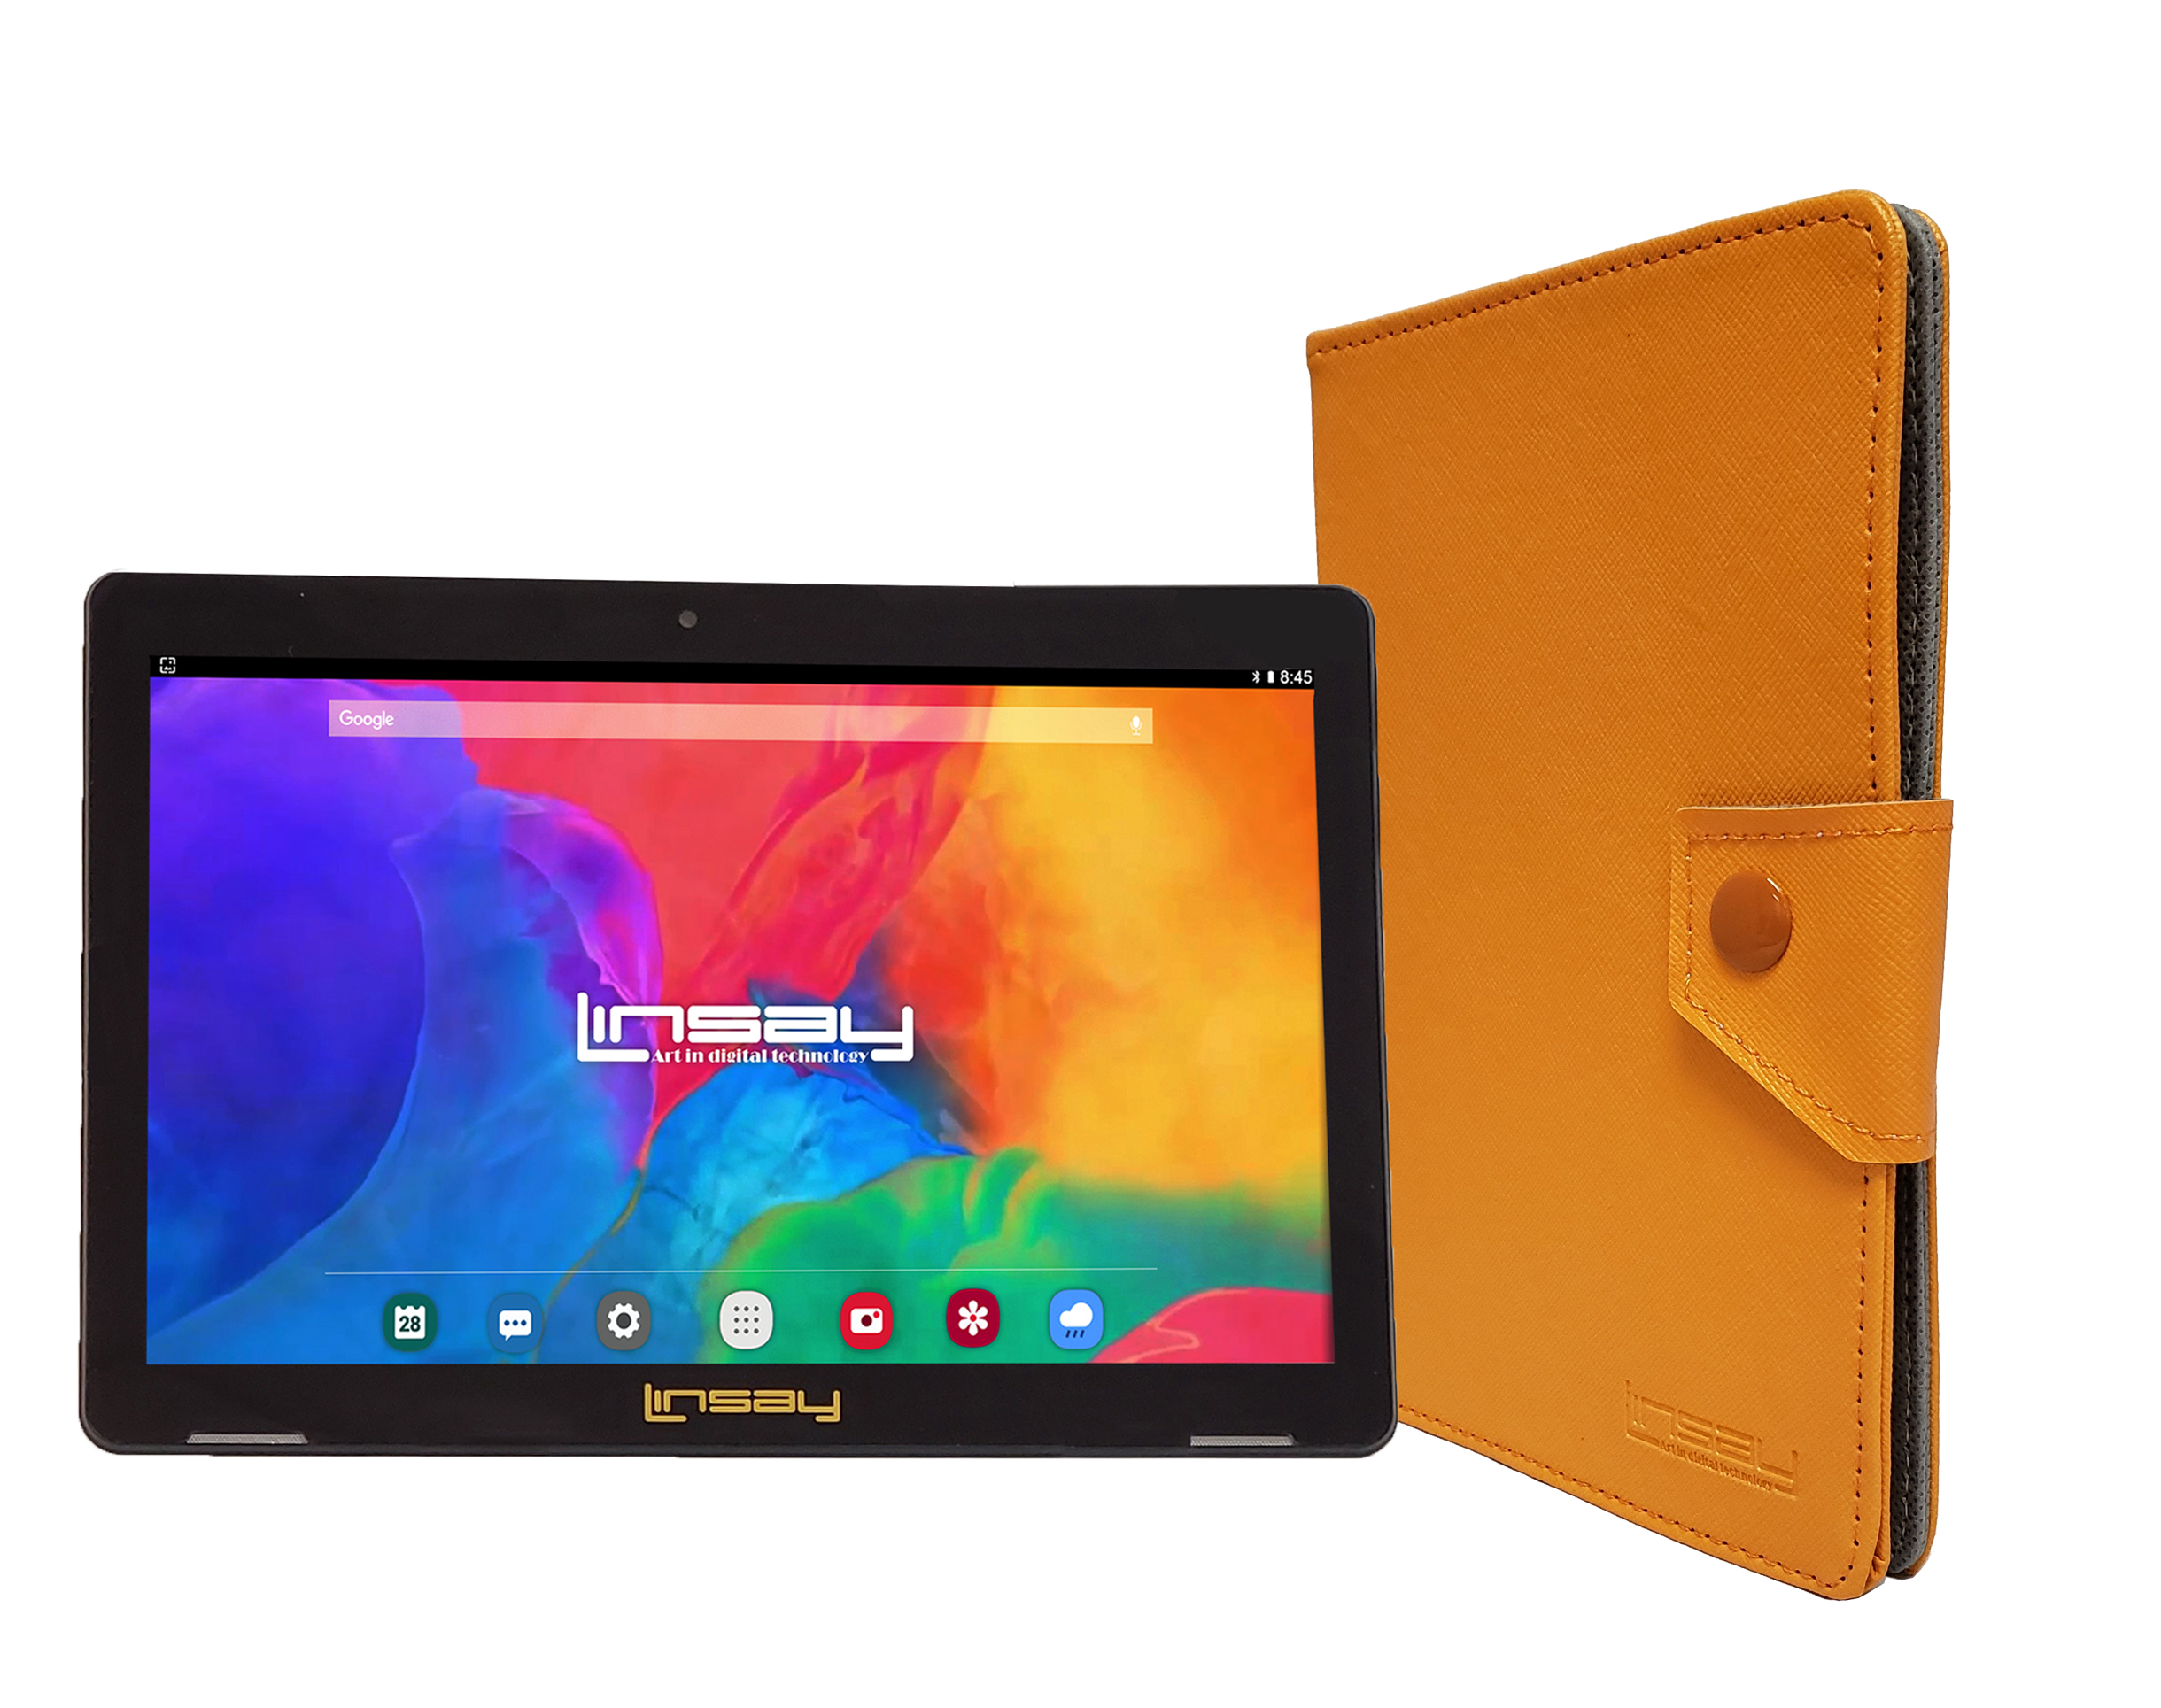 LINSAY 10.1" IPS 2GB RAM 64GB Storage Android 13 Tablet with Protective case Orange color, Google Certified - image 2 of 3